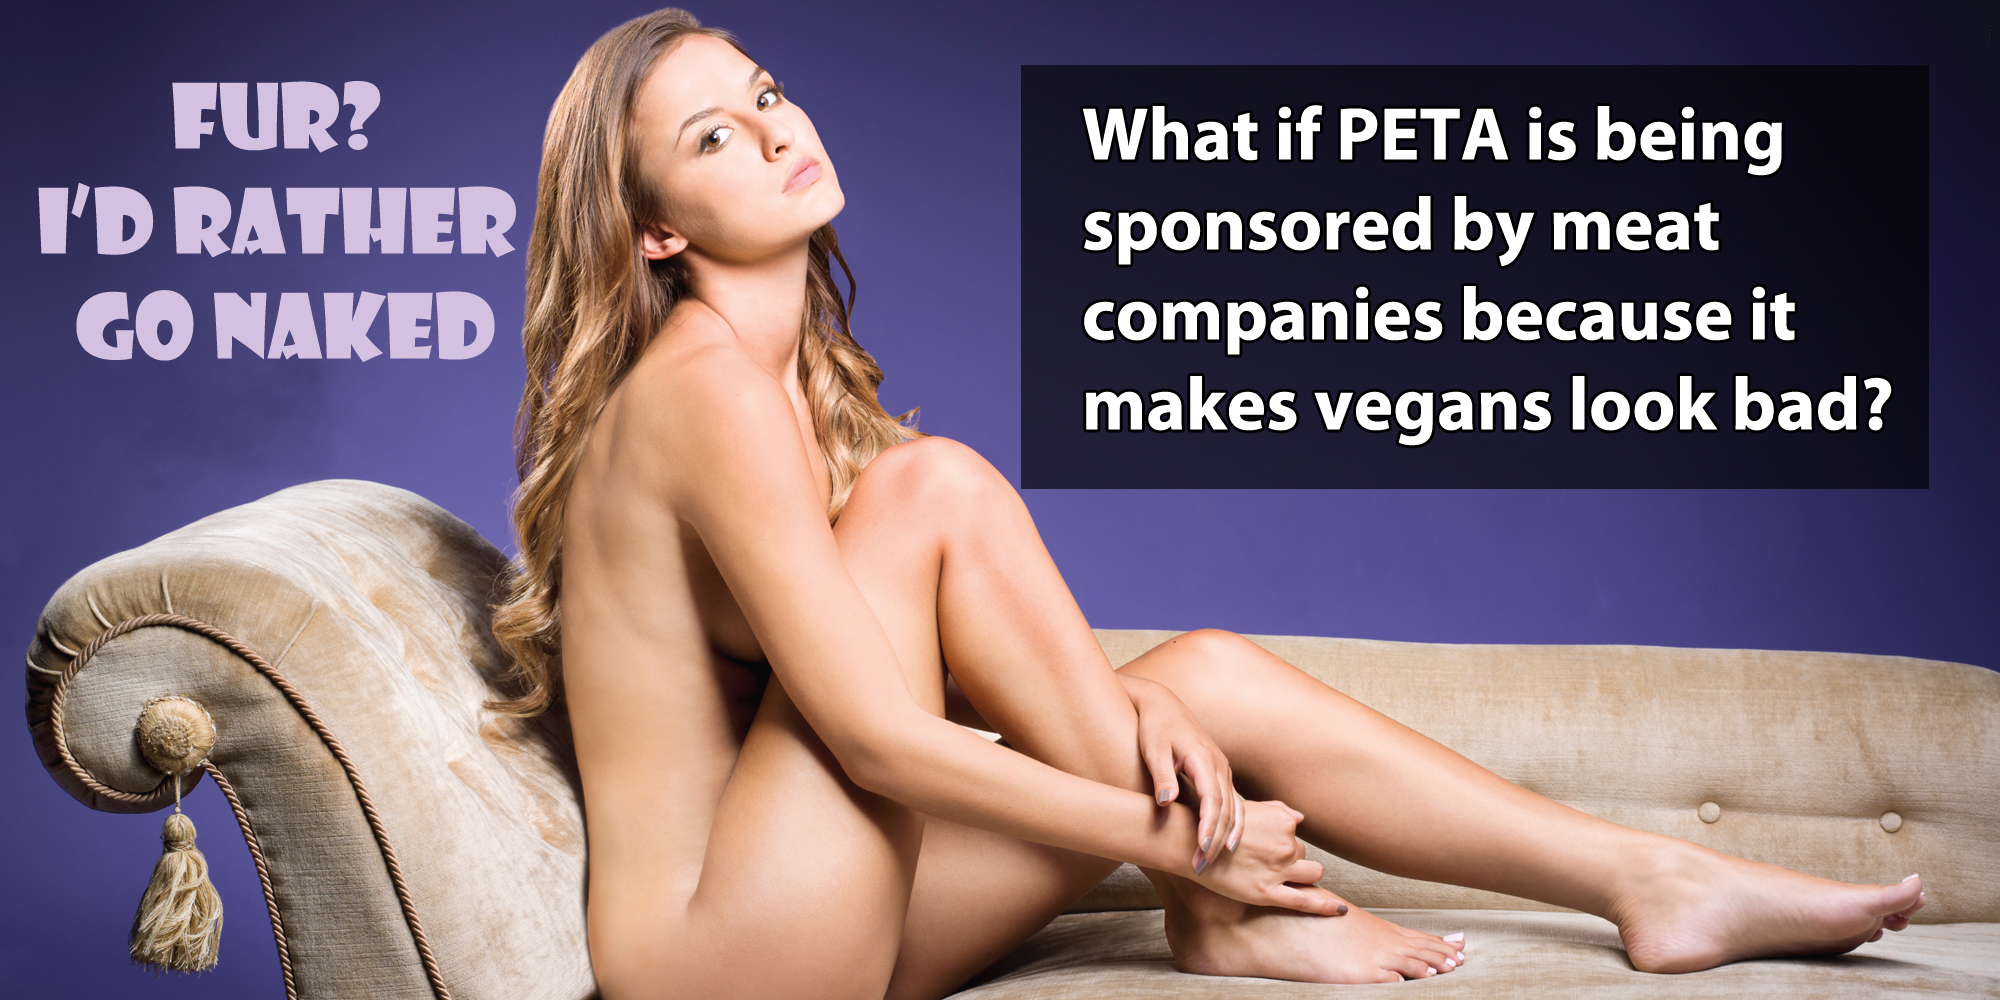 human leg - Fur? I'D Rather Go Naked What if Peta is being sponsored by meat companies because it makes vegans look bad?